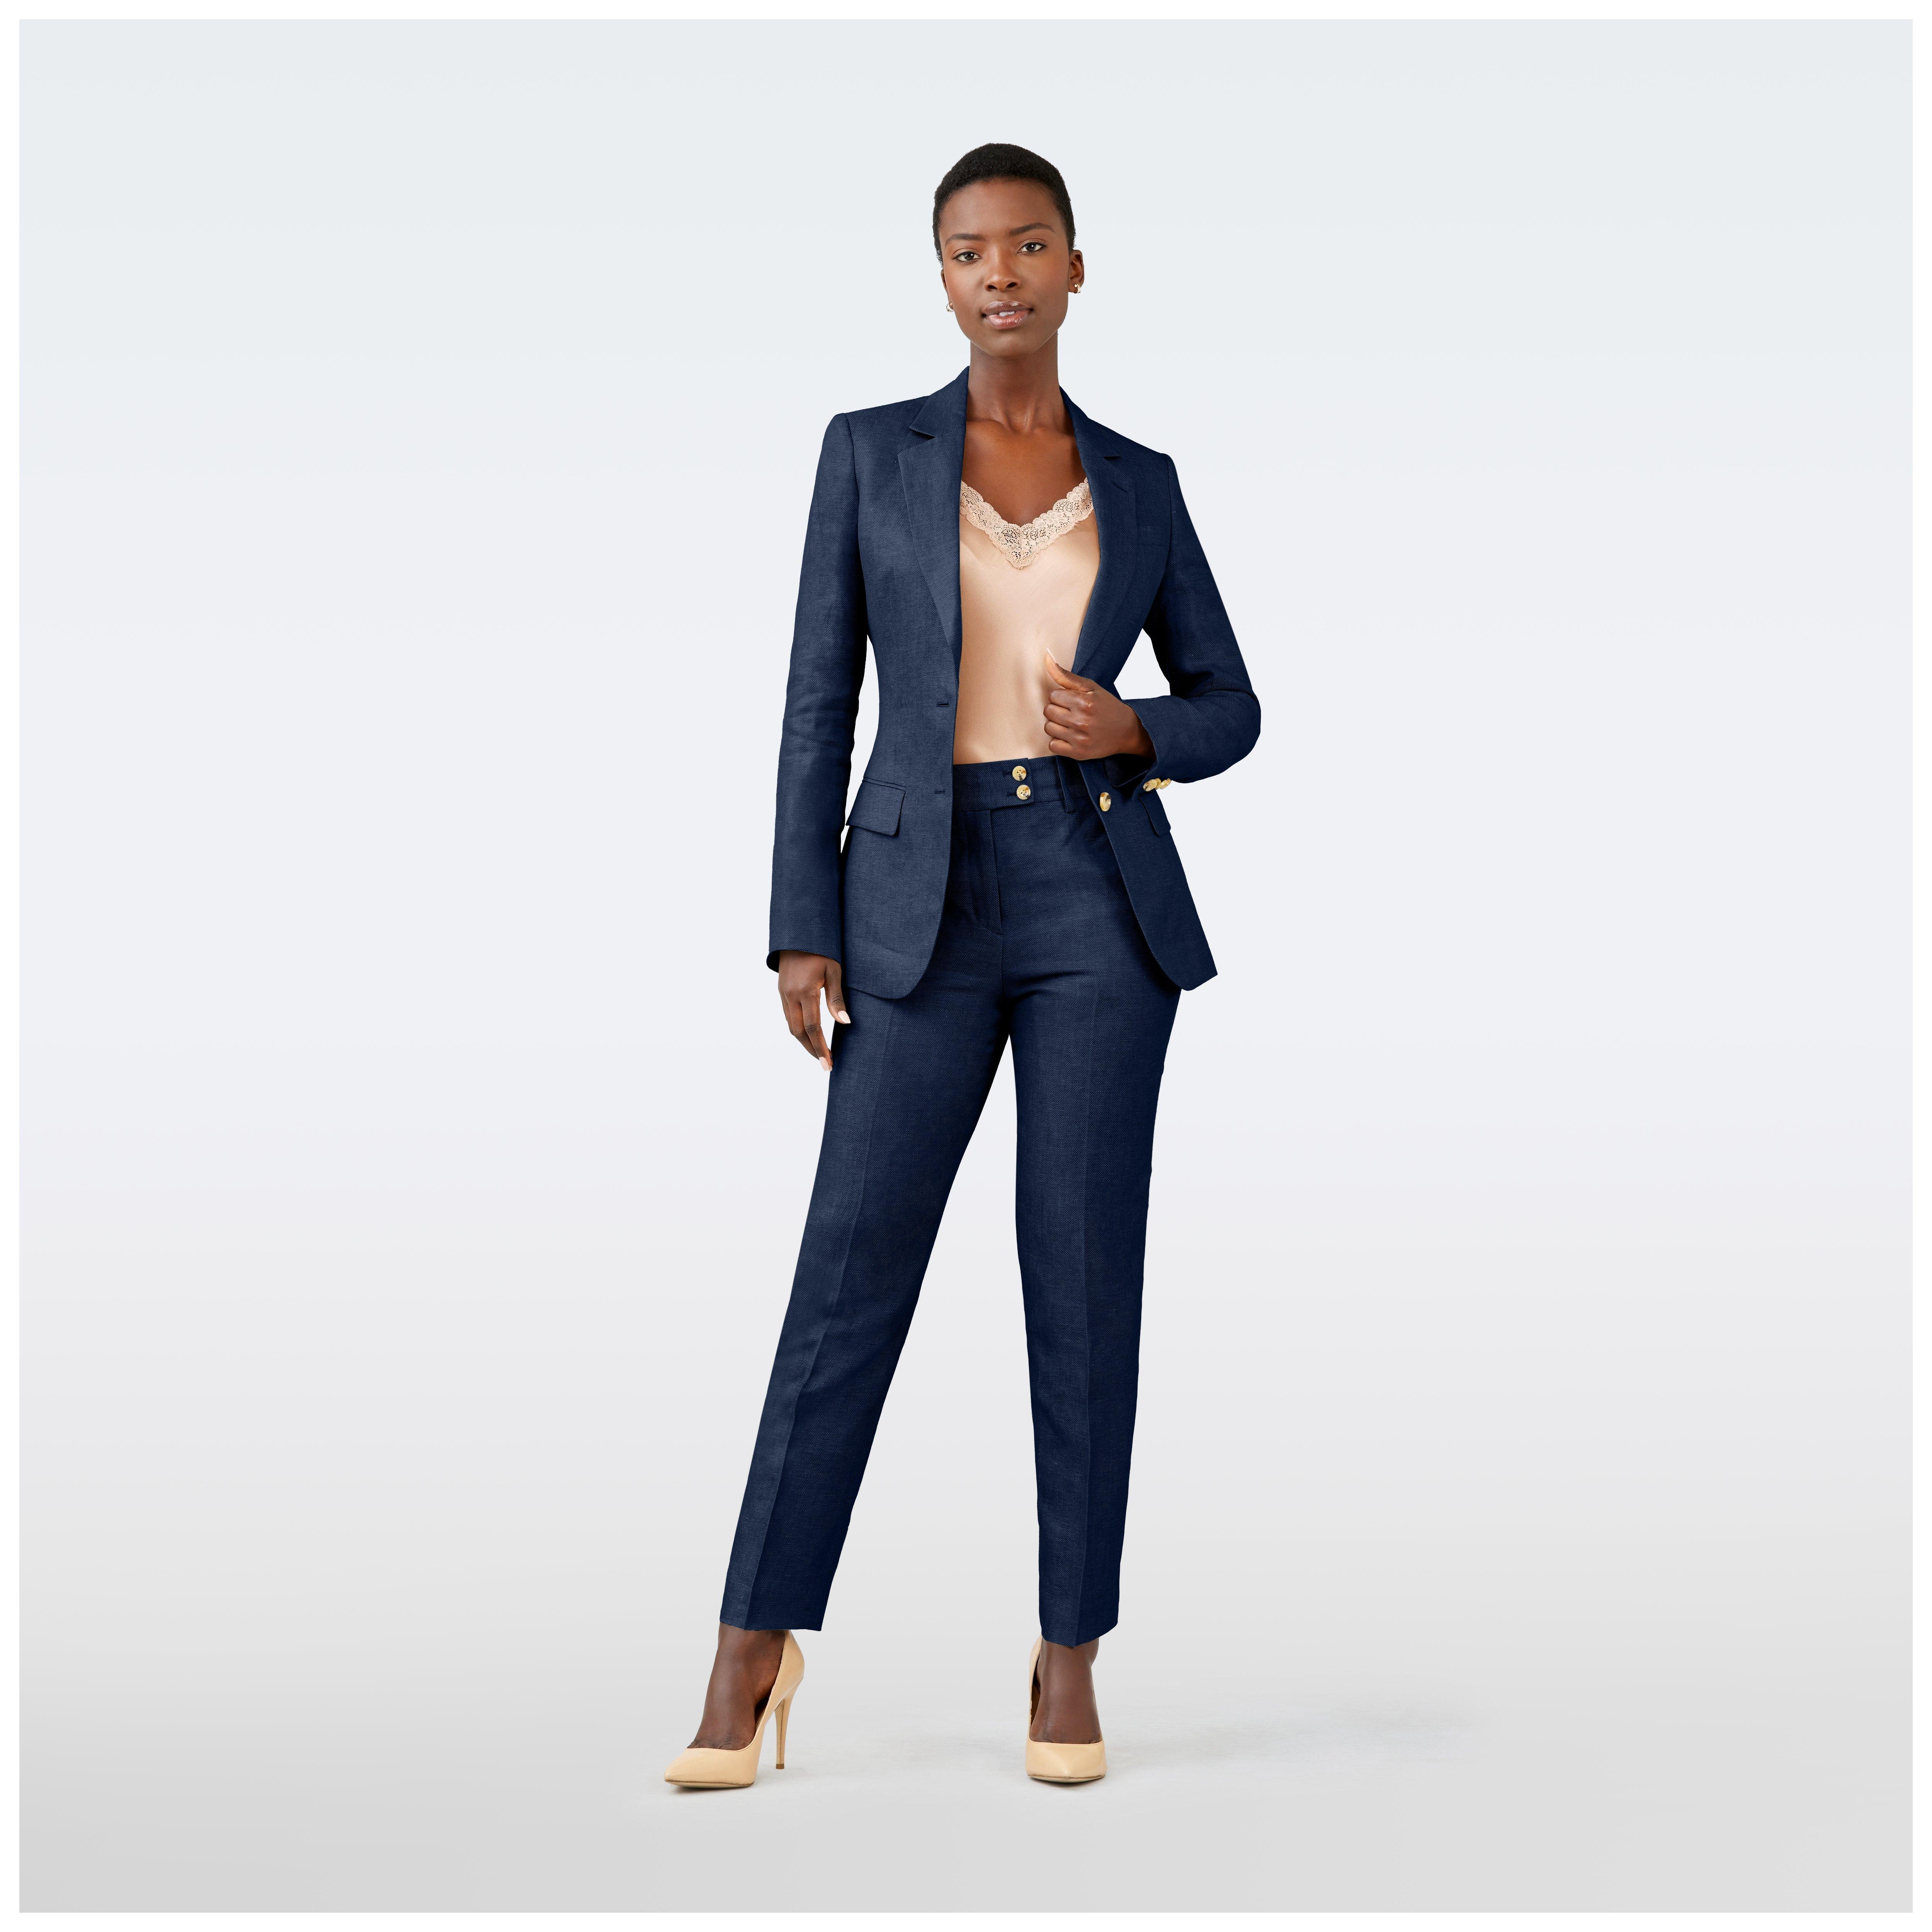 Women's Suit One Button Dark Blue Suit Ol Style Women's Intellectual  Clothing - China Suits and Clothing price | Made-in-China.com